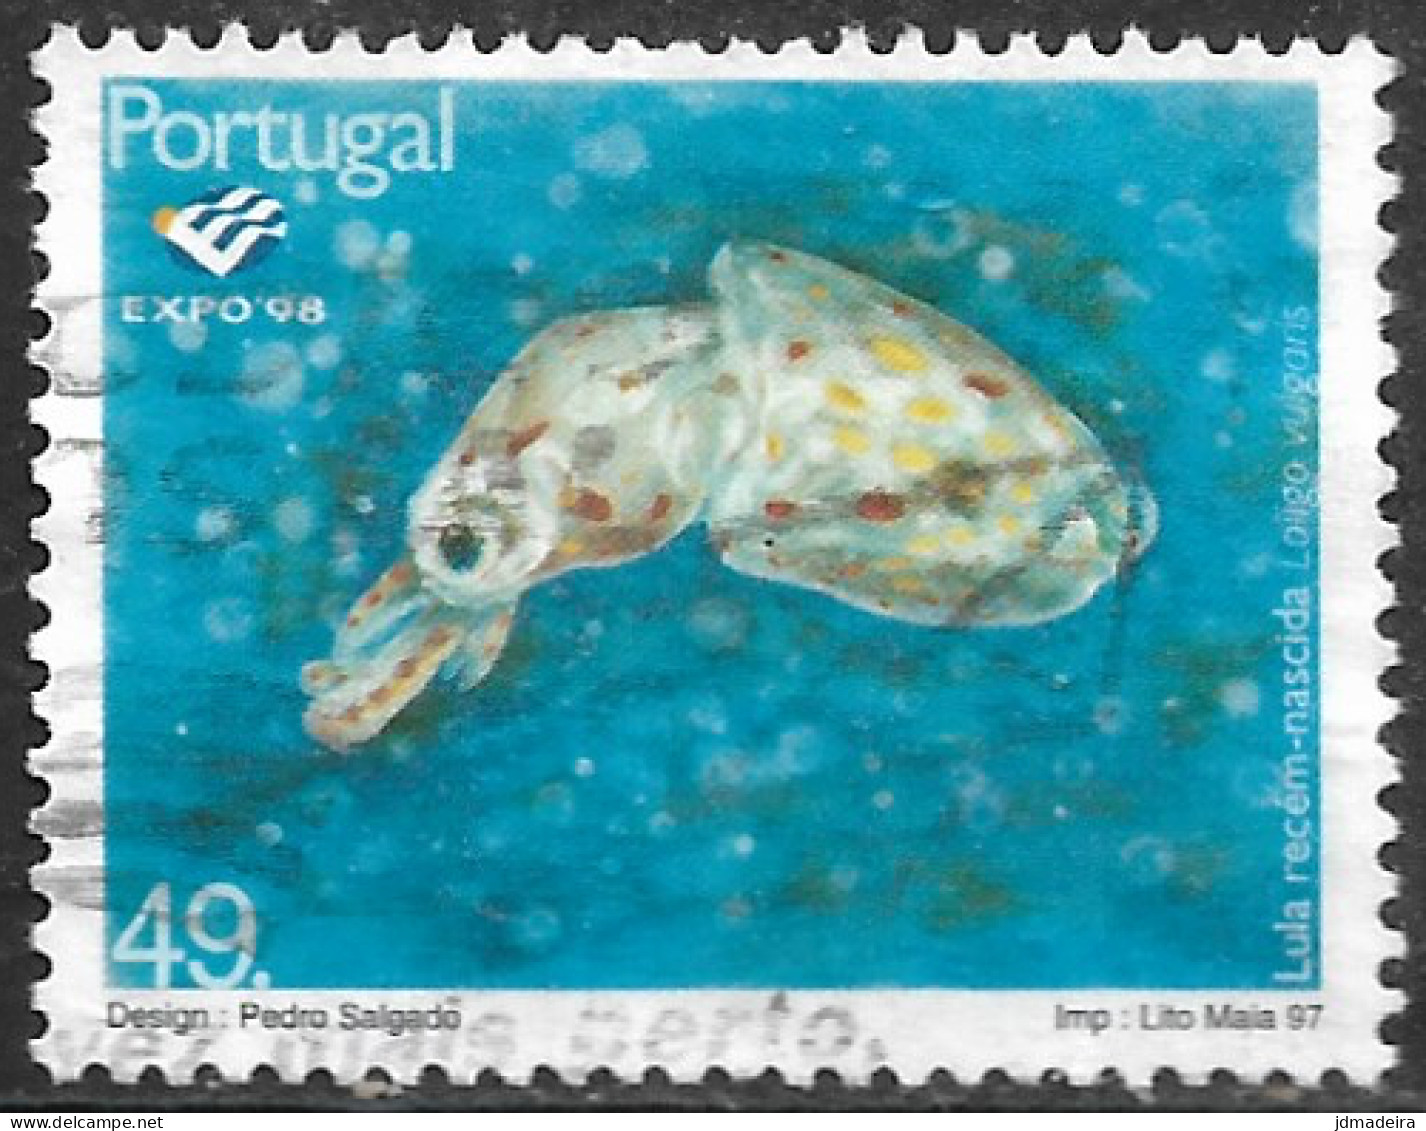 Portugal – 1997 Expo'98 40. Used Stamp - Oblitérés